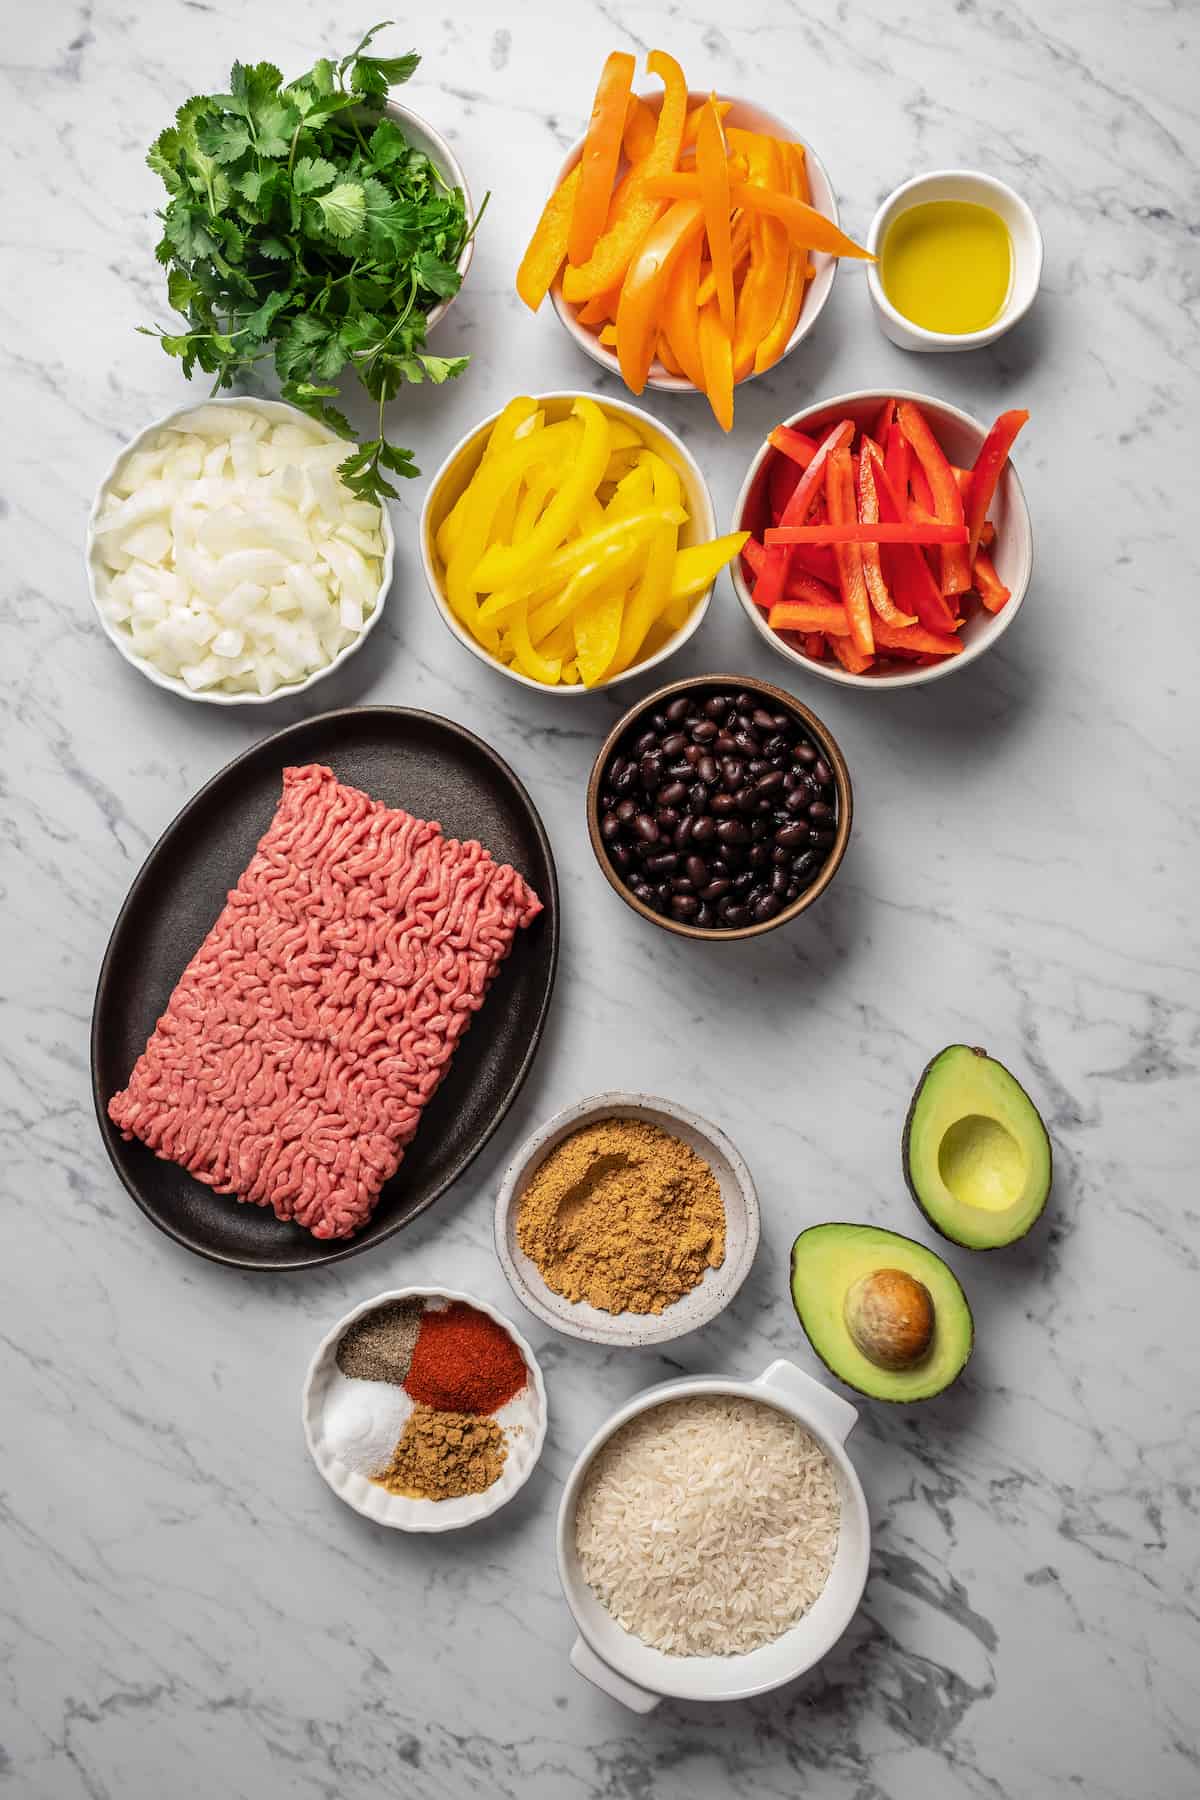 Ingredients for taco bowls separated into bowls.